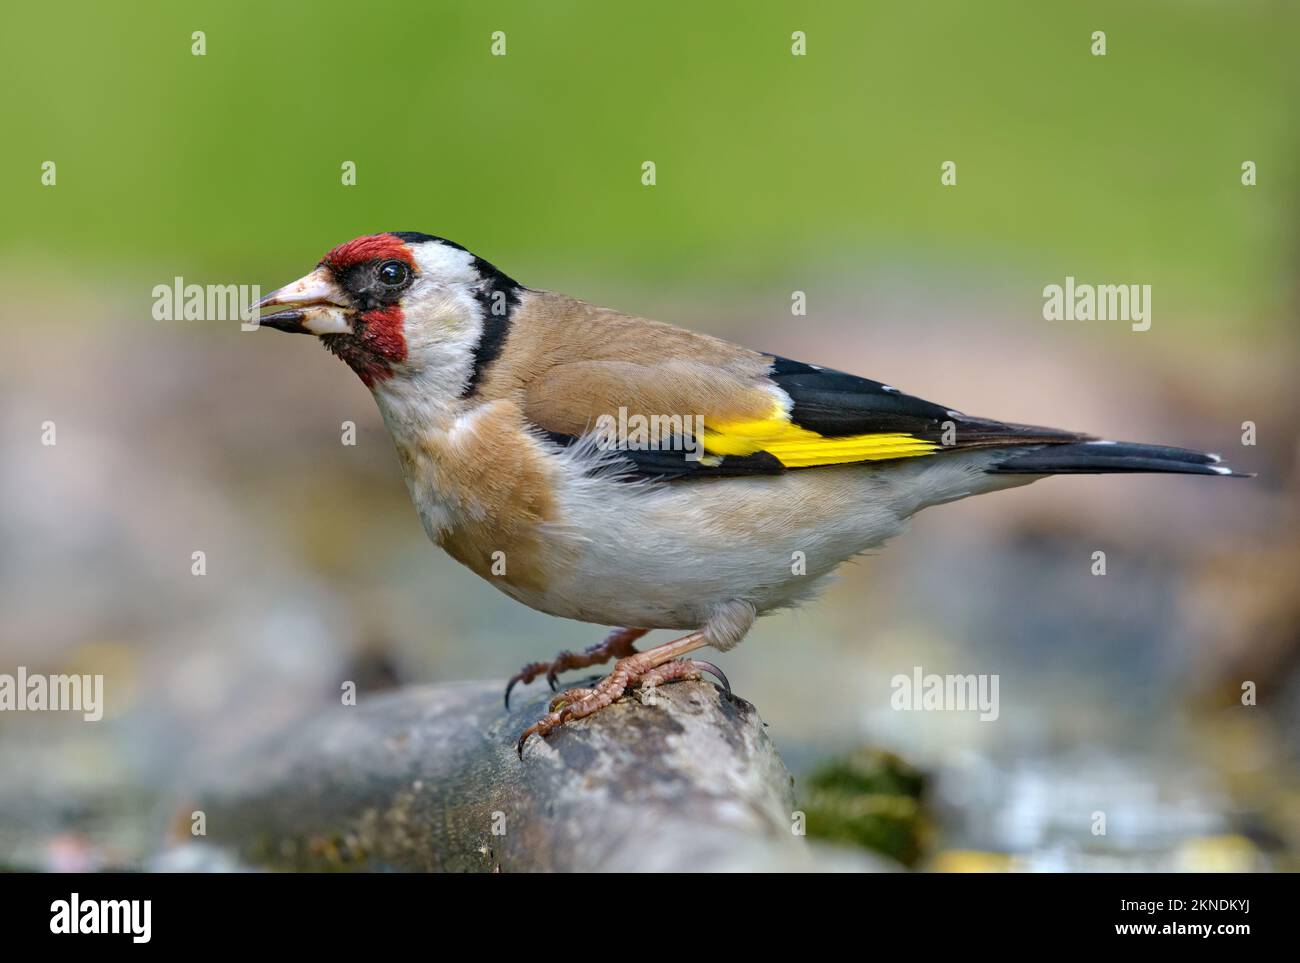 European goldfinch (Carduelis carduelis) posing in full plumage beauty on some perch Stock Photo